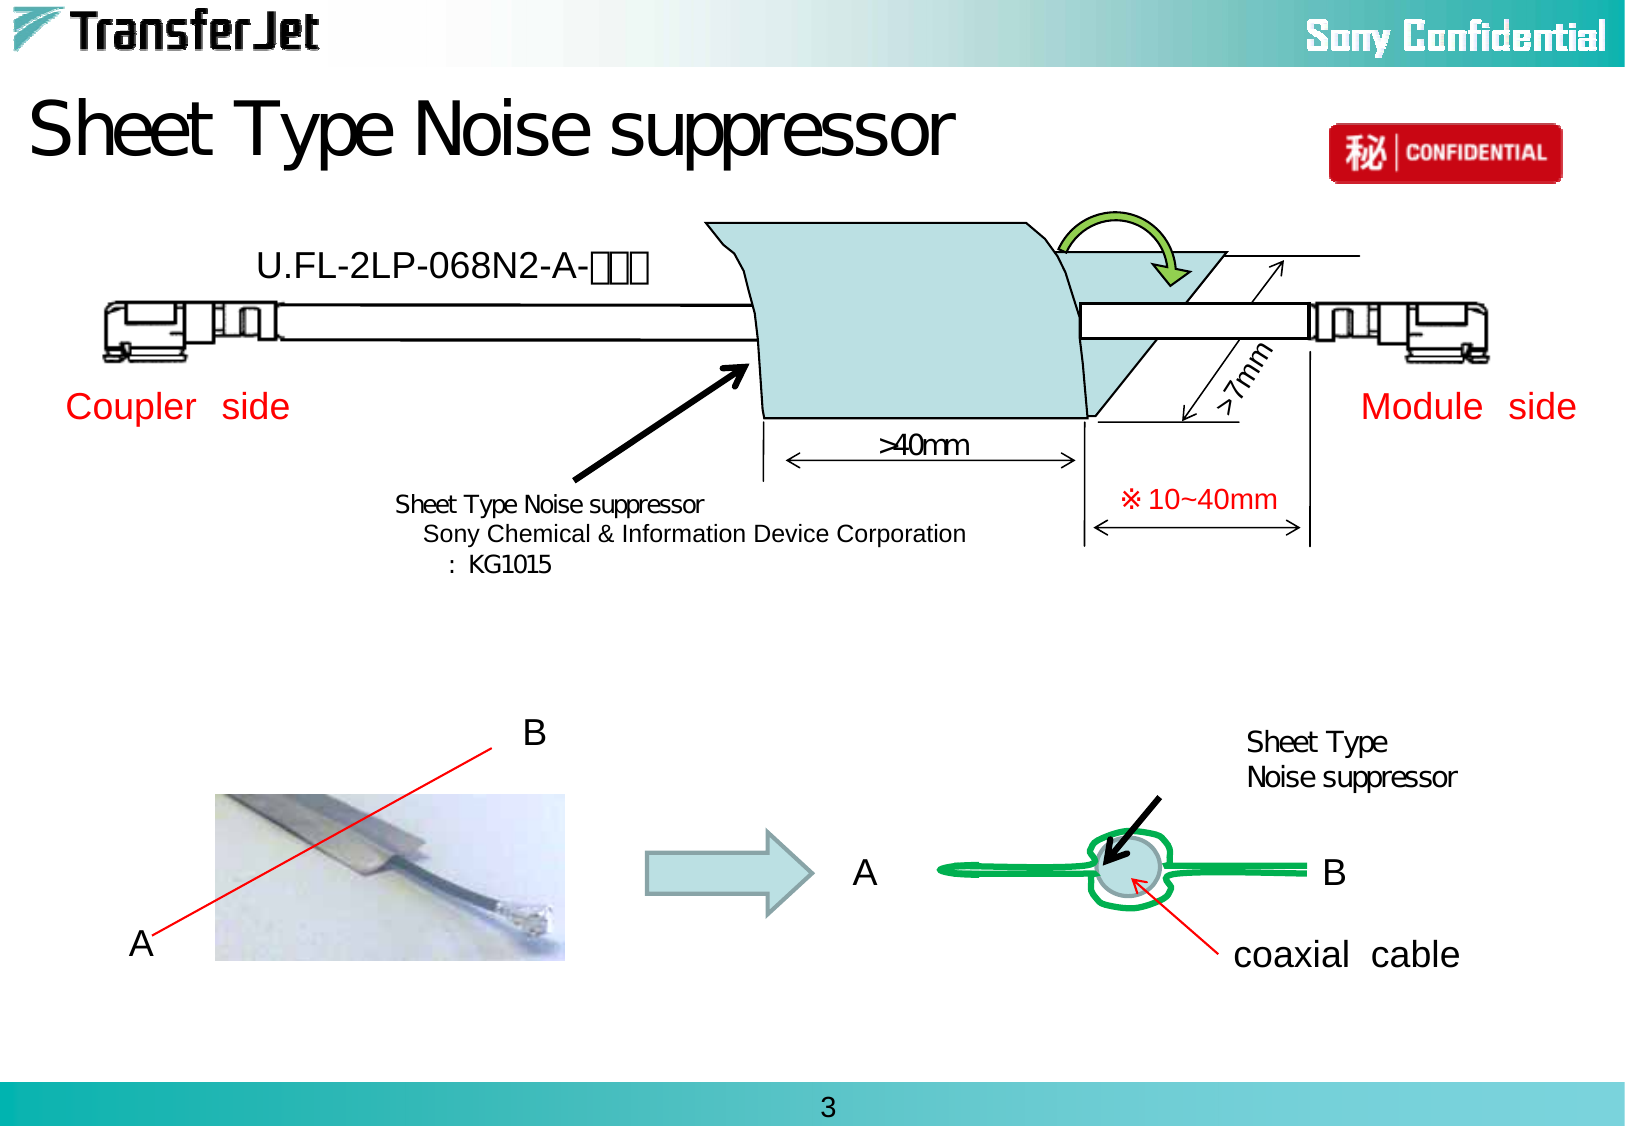 3Sheet Type Noise suppressorCoupler side&gt;7mm&gt;40mmU.FL-2LP-068N2-A-ｘｘｘModule side※10~40mmSheet Type Noise suppressorSony Chemical &amp; Information Device Corporation:  KG1015ABSheet Type Noise suppressorABcoaxial  cable